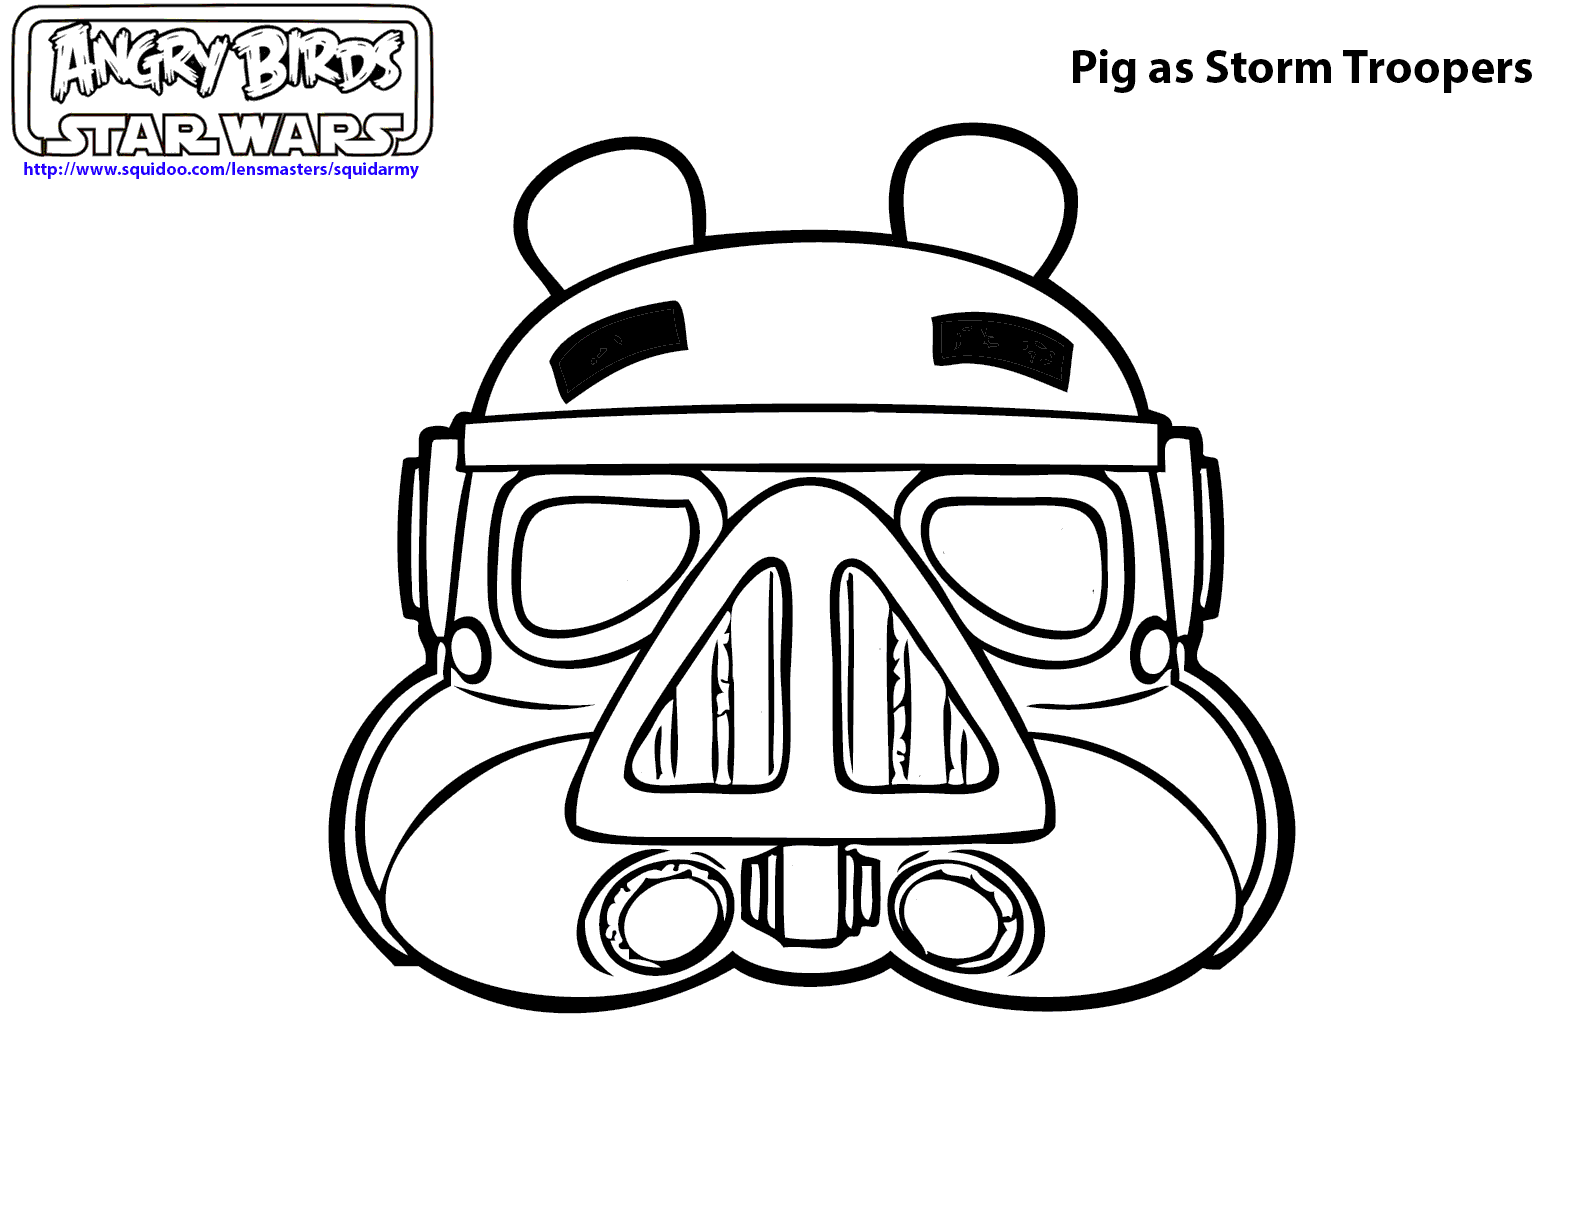 angry-birds-star-wars-coloring-pages-ii-squid-army